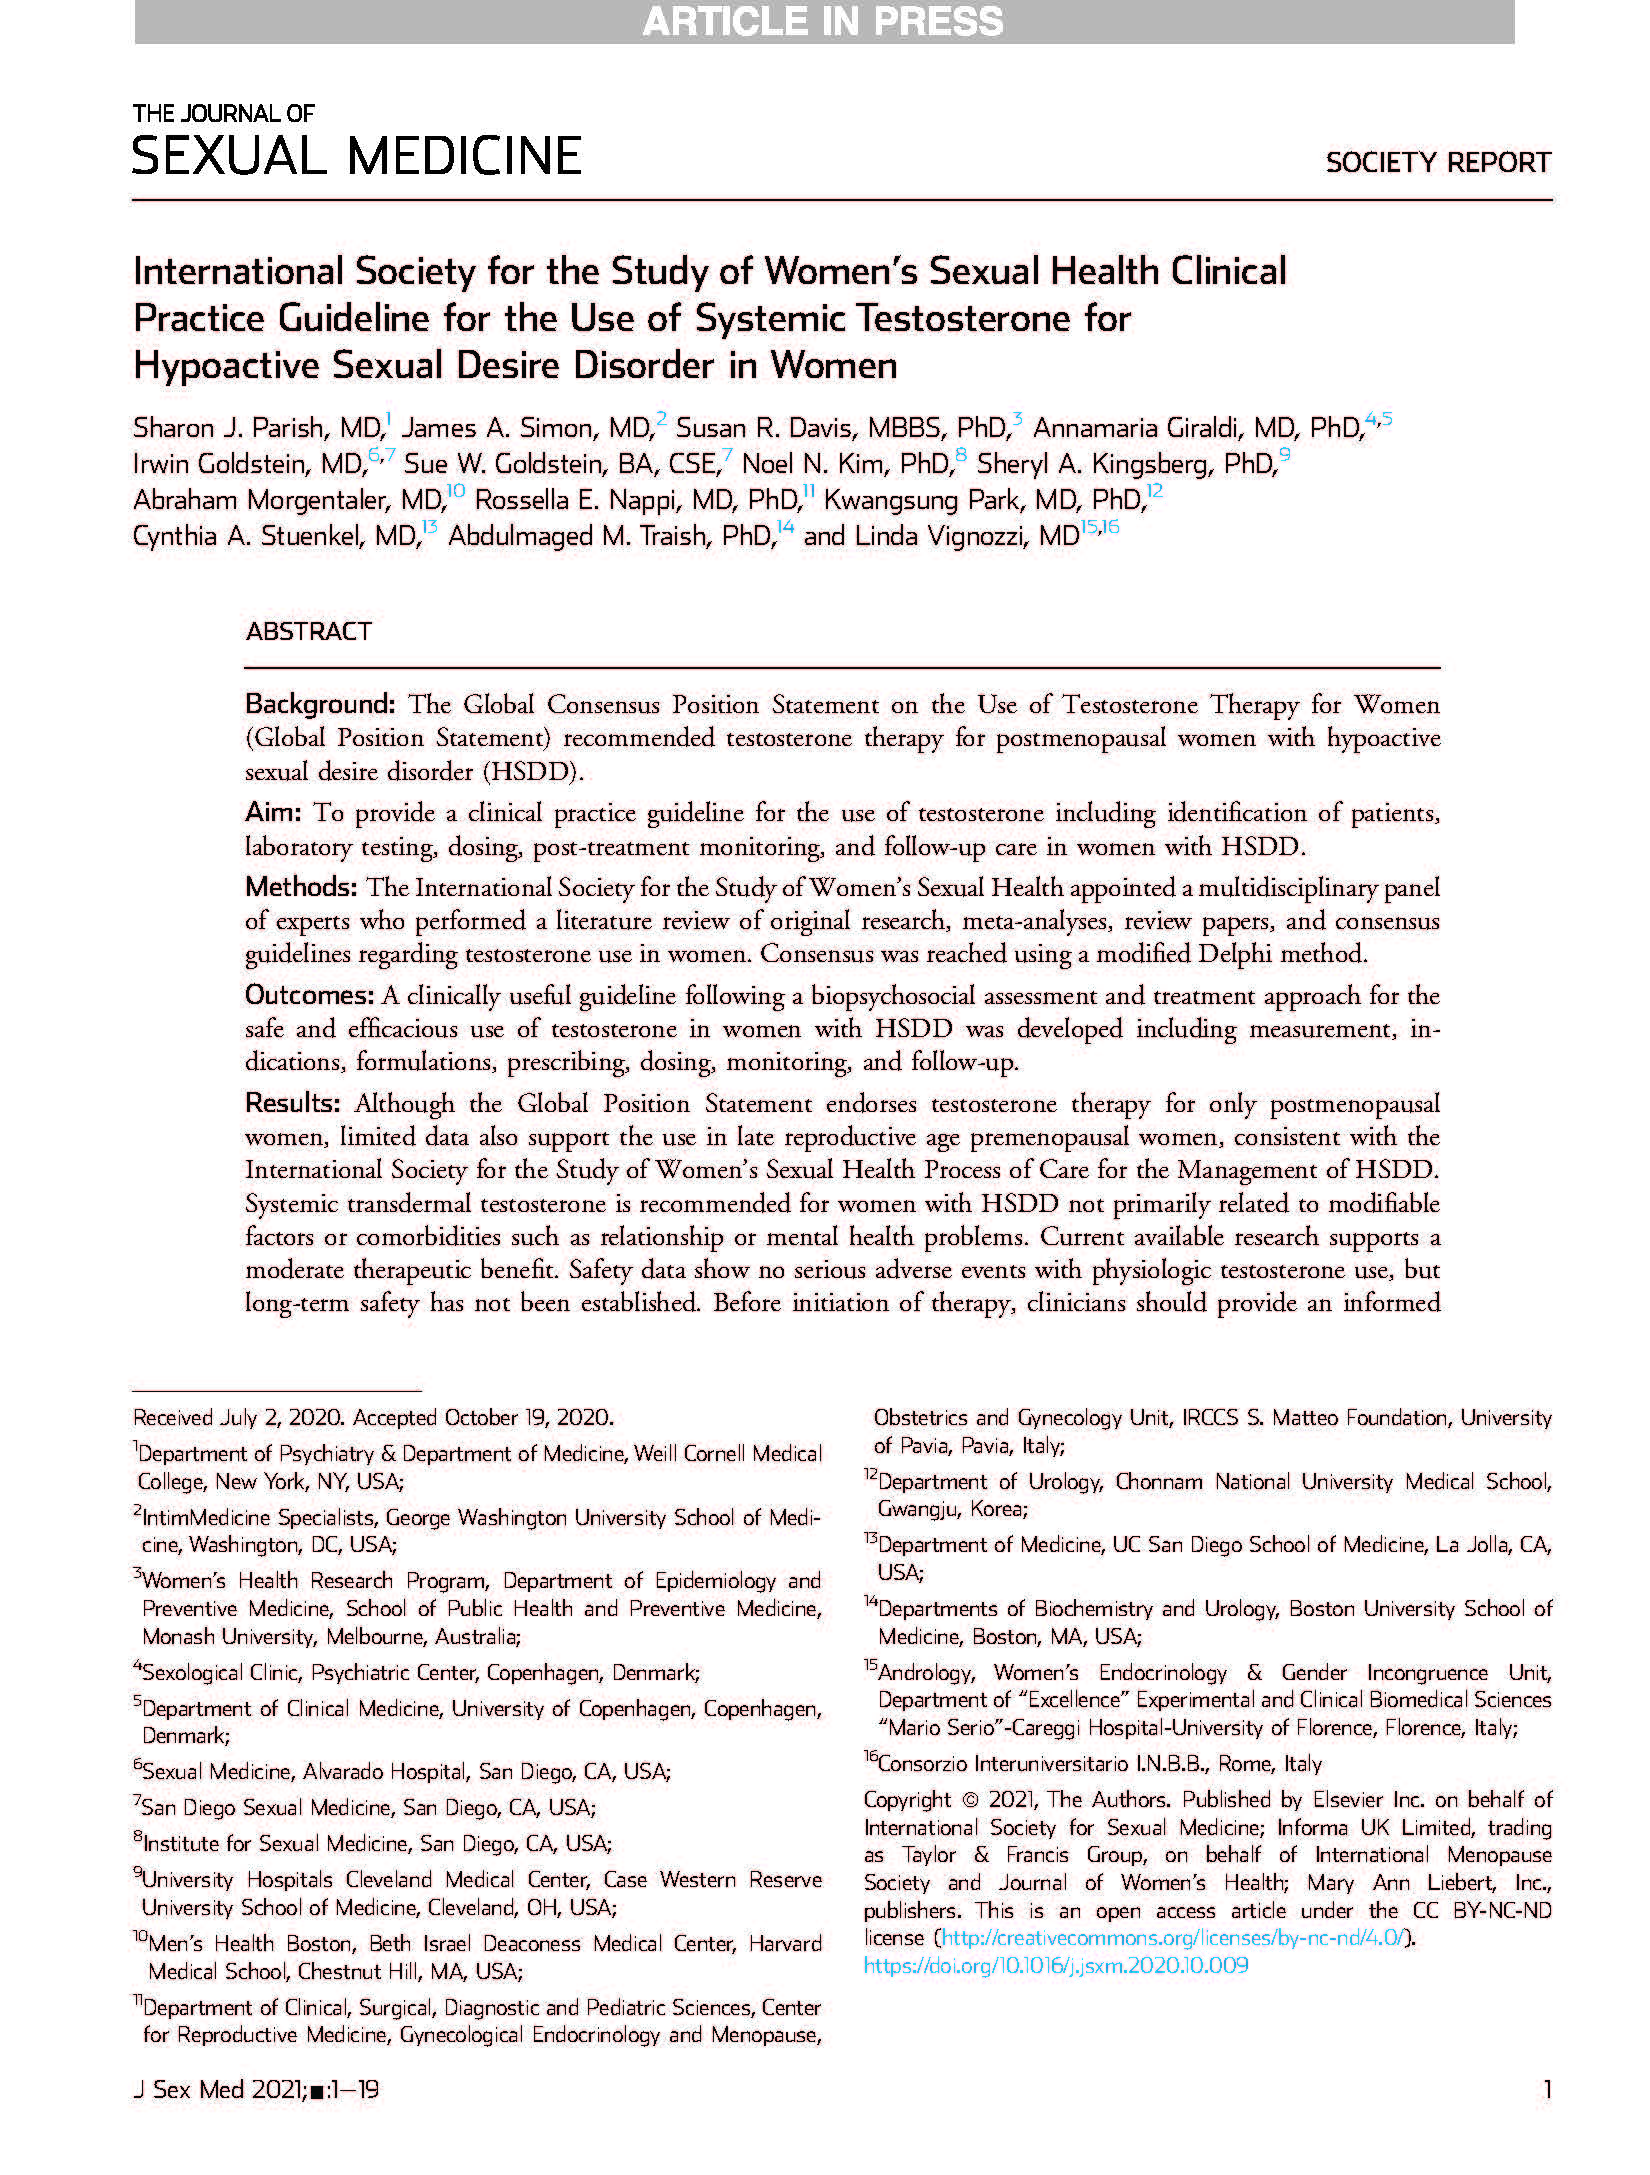 International Society for the Study of Women’s Sexual Health Clinical Practice Guideline for the Use of Systemic Testosterone for Hypoactive Sexual Desire Disorder in Women